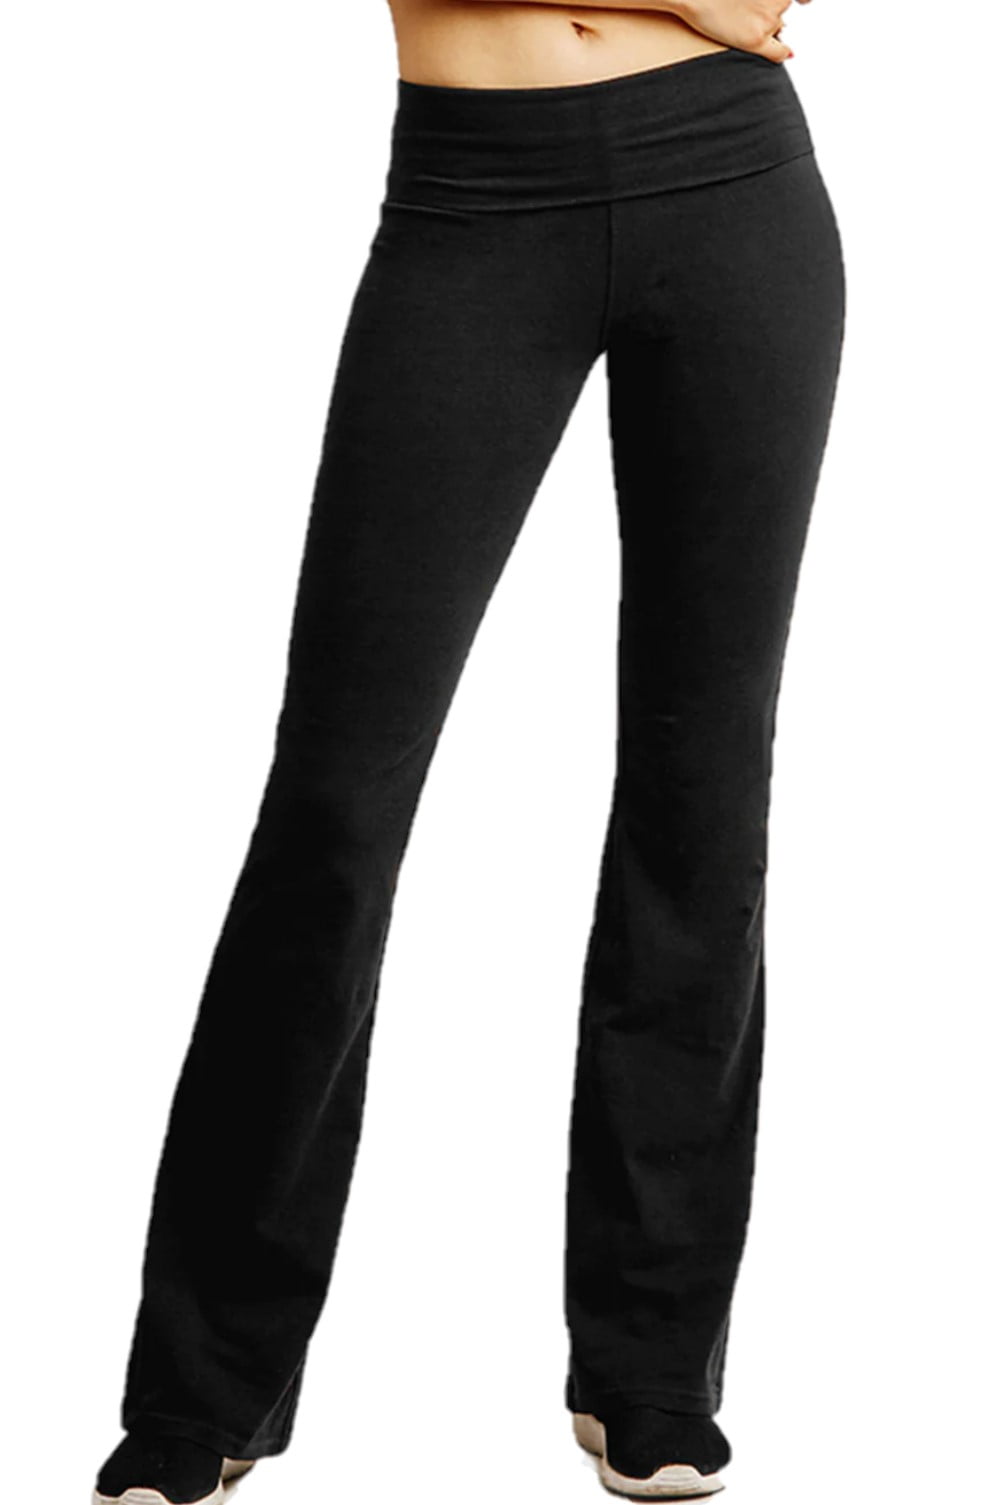 HISKYWIN Regular Bootcut Control F203 Dark  Gym clothes women, Yoga pants  outfit, Boot cut yoga pants outfit